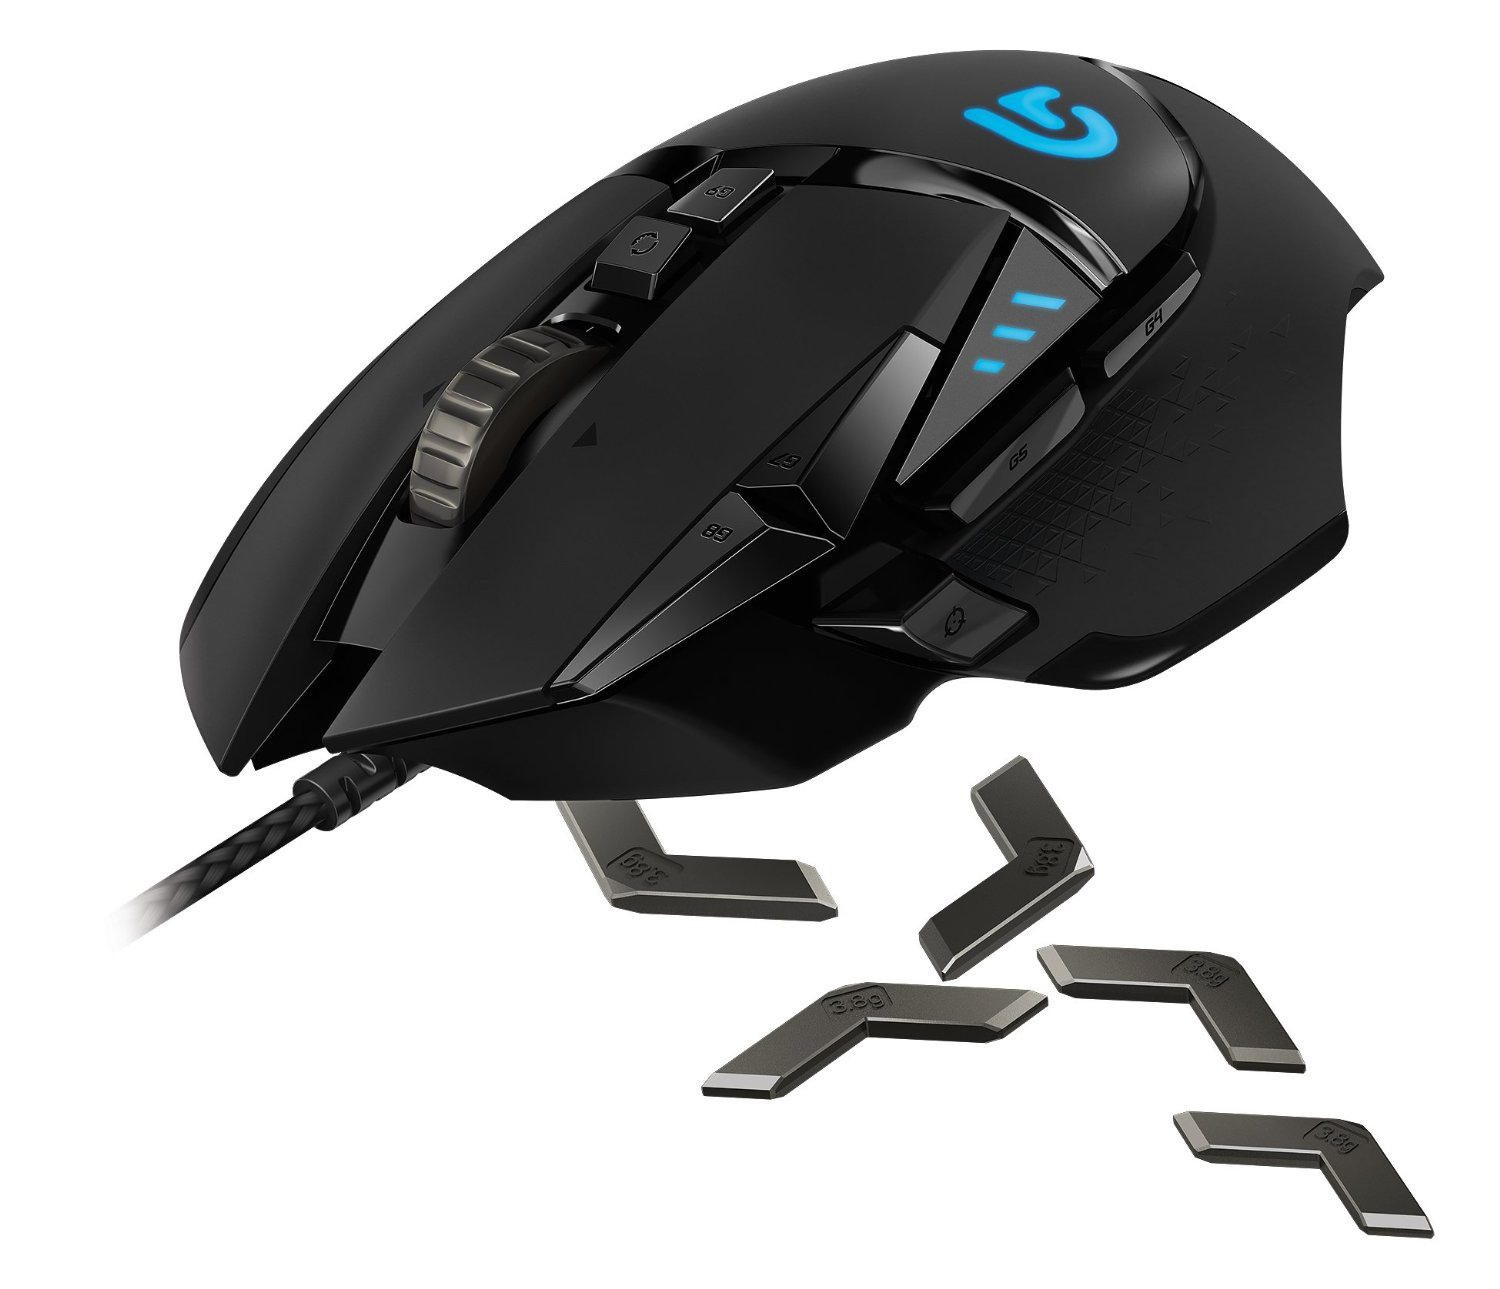 If you're an Overwatch or CounterStrike: Global Offensive player, the big boys play on PC. Click on their heads faster with a nice gaming mouse.<br><br>Grab a Logitech G502 Proteus Spectrum <a href="https://amzn.to/2C8SiOQ" target="_blank" "nofollow">here</a>.